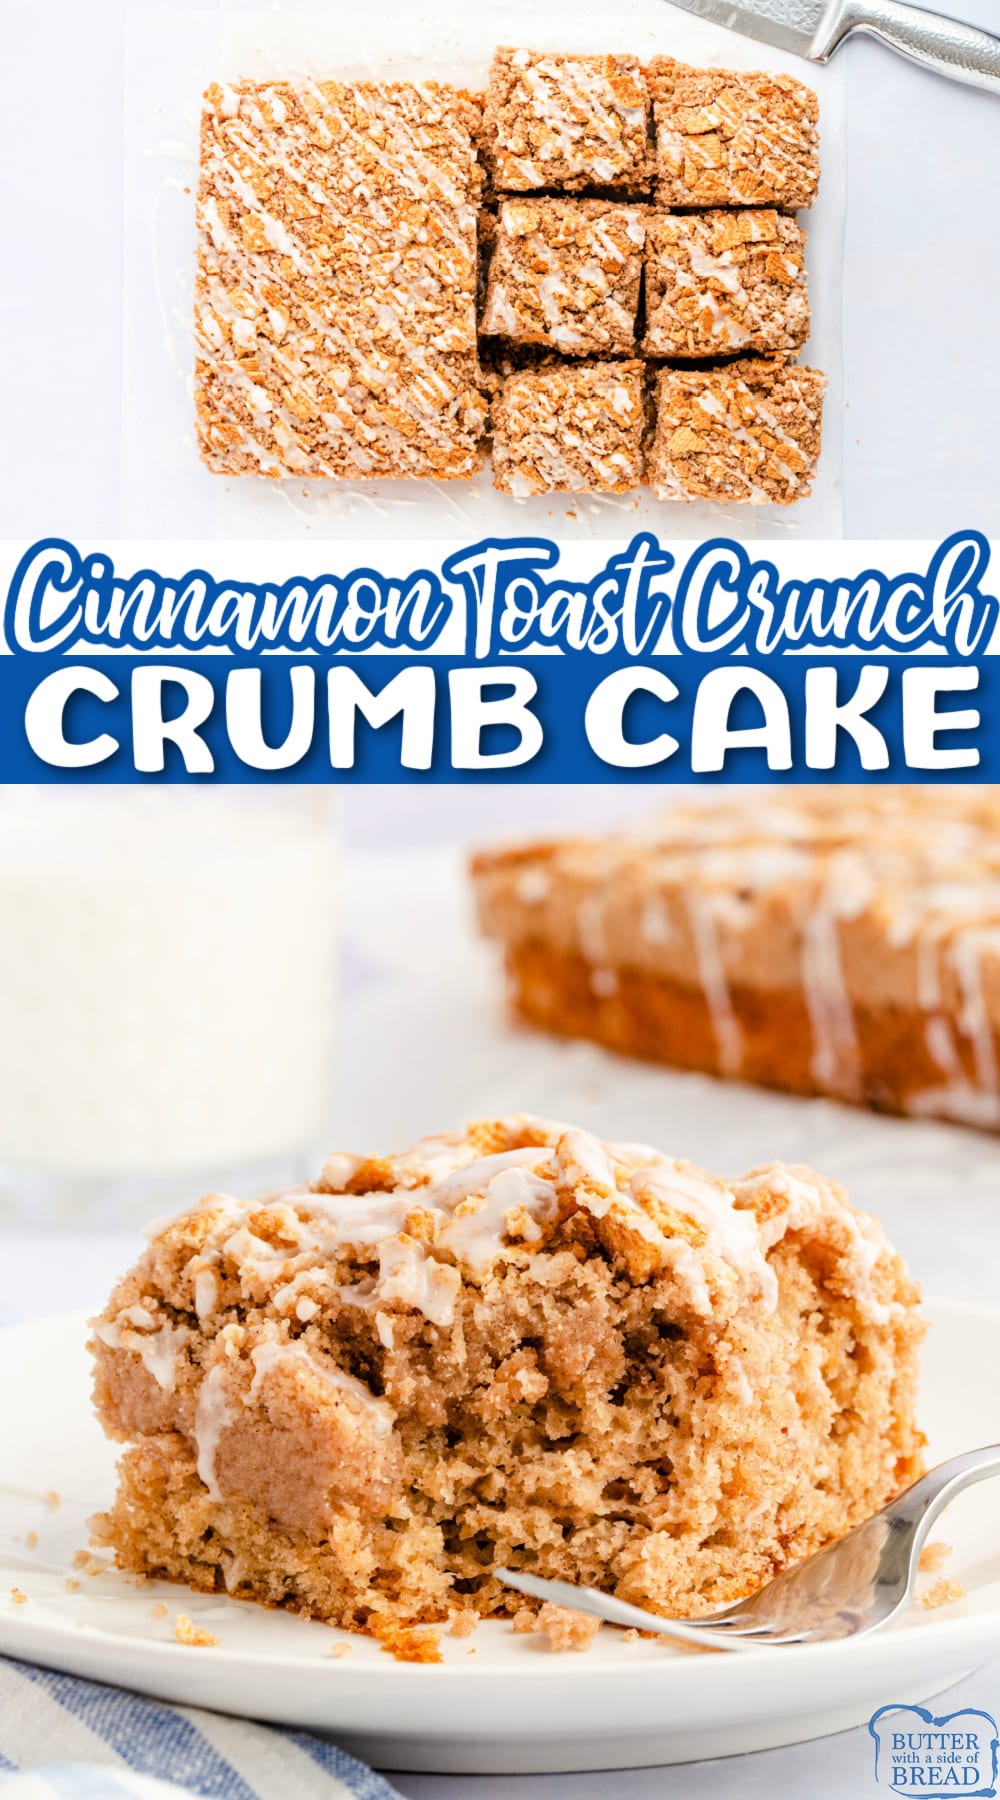 Cinnamon Toast Crunch Crumb Cake is absolutely delicious and so easy to make using a boxed cake mix. Soft, moist cake recipe covered with a crunchy cinnamon topping.